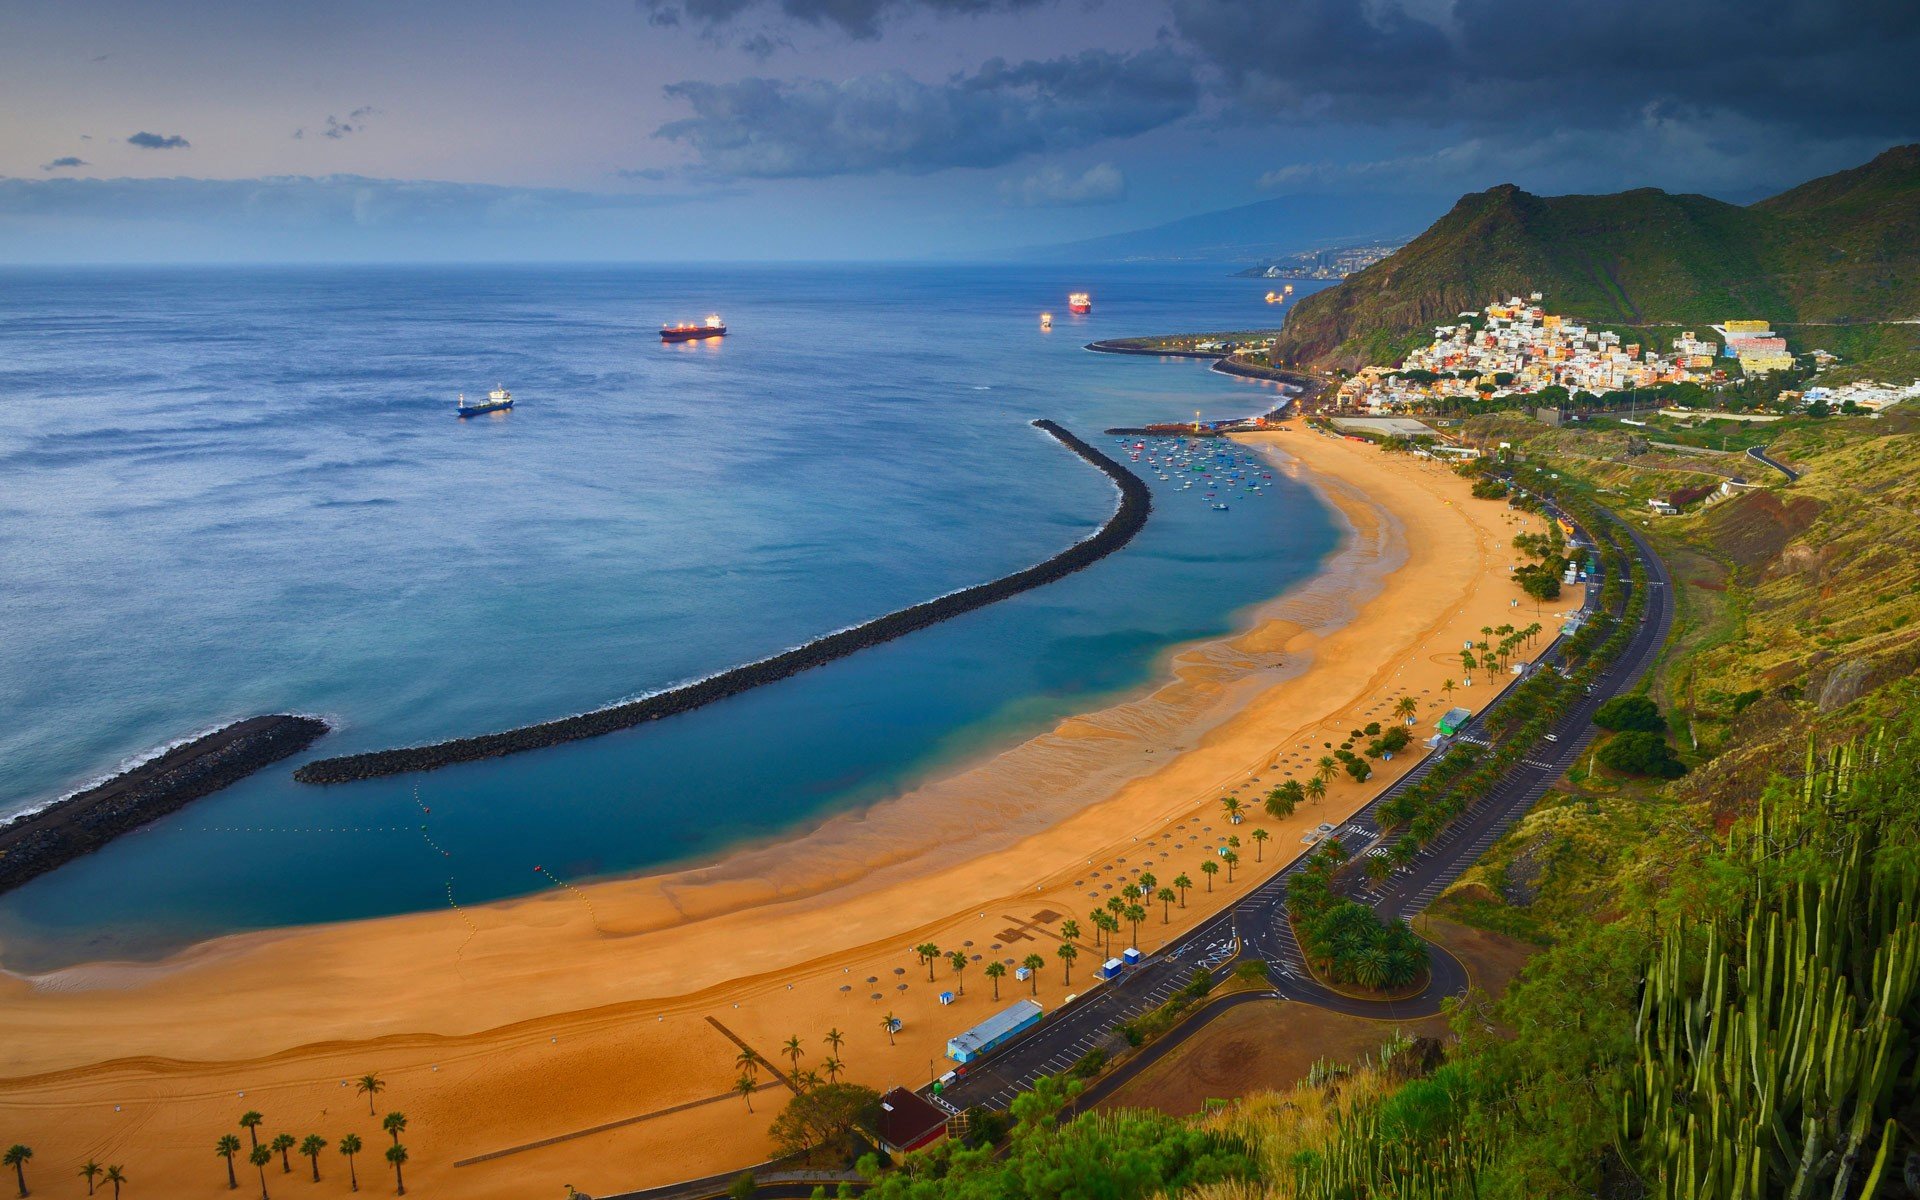 Canary Islands • Country facts • PopulationData.net